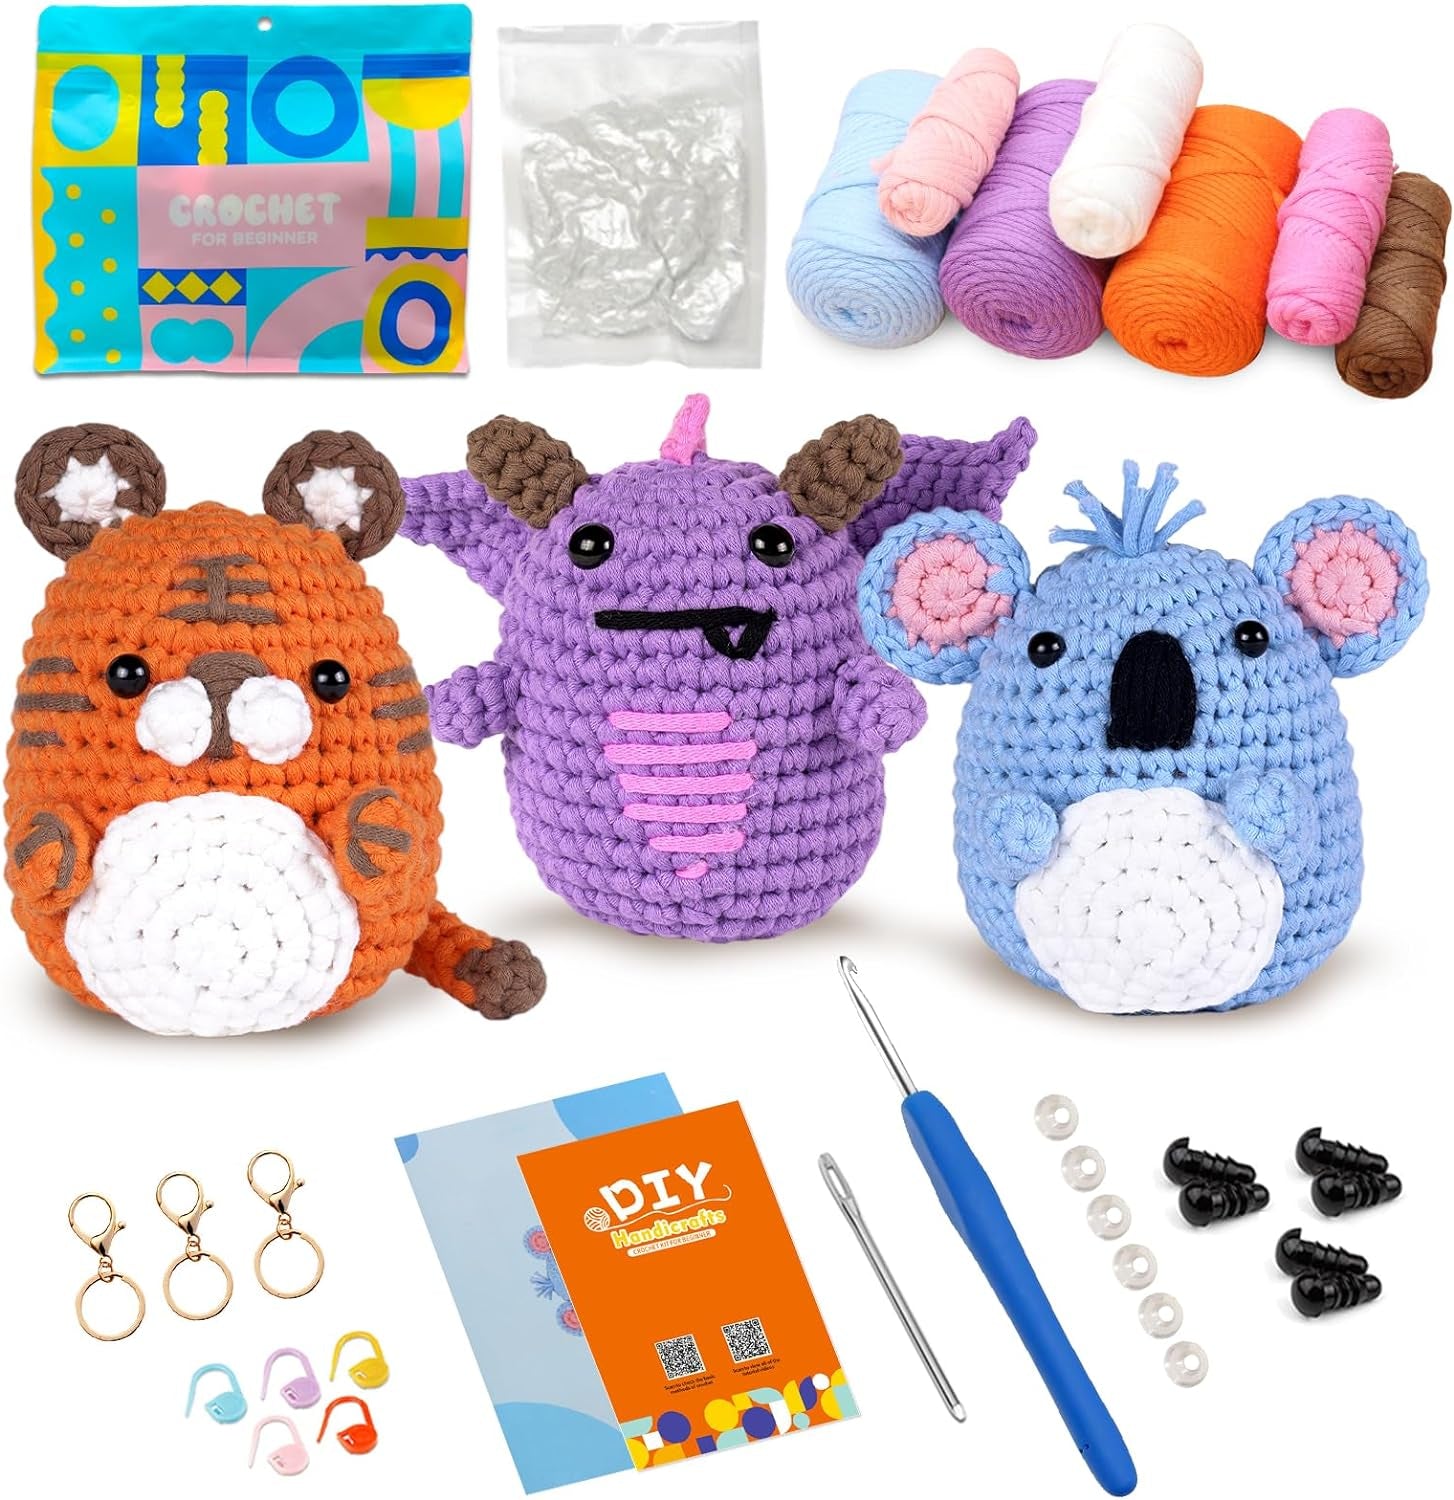 Crochet Kit for Beginners, 3 Pattern Animals-Owl, Penguin, Frog, Knitting Kit for Adult Kids with Step-By-Step Video Tutorials and Yarns, Hook, Accessories